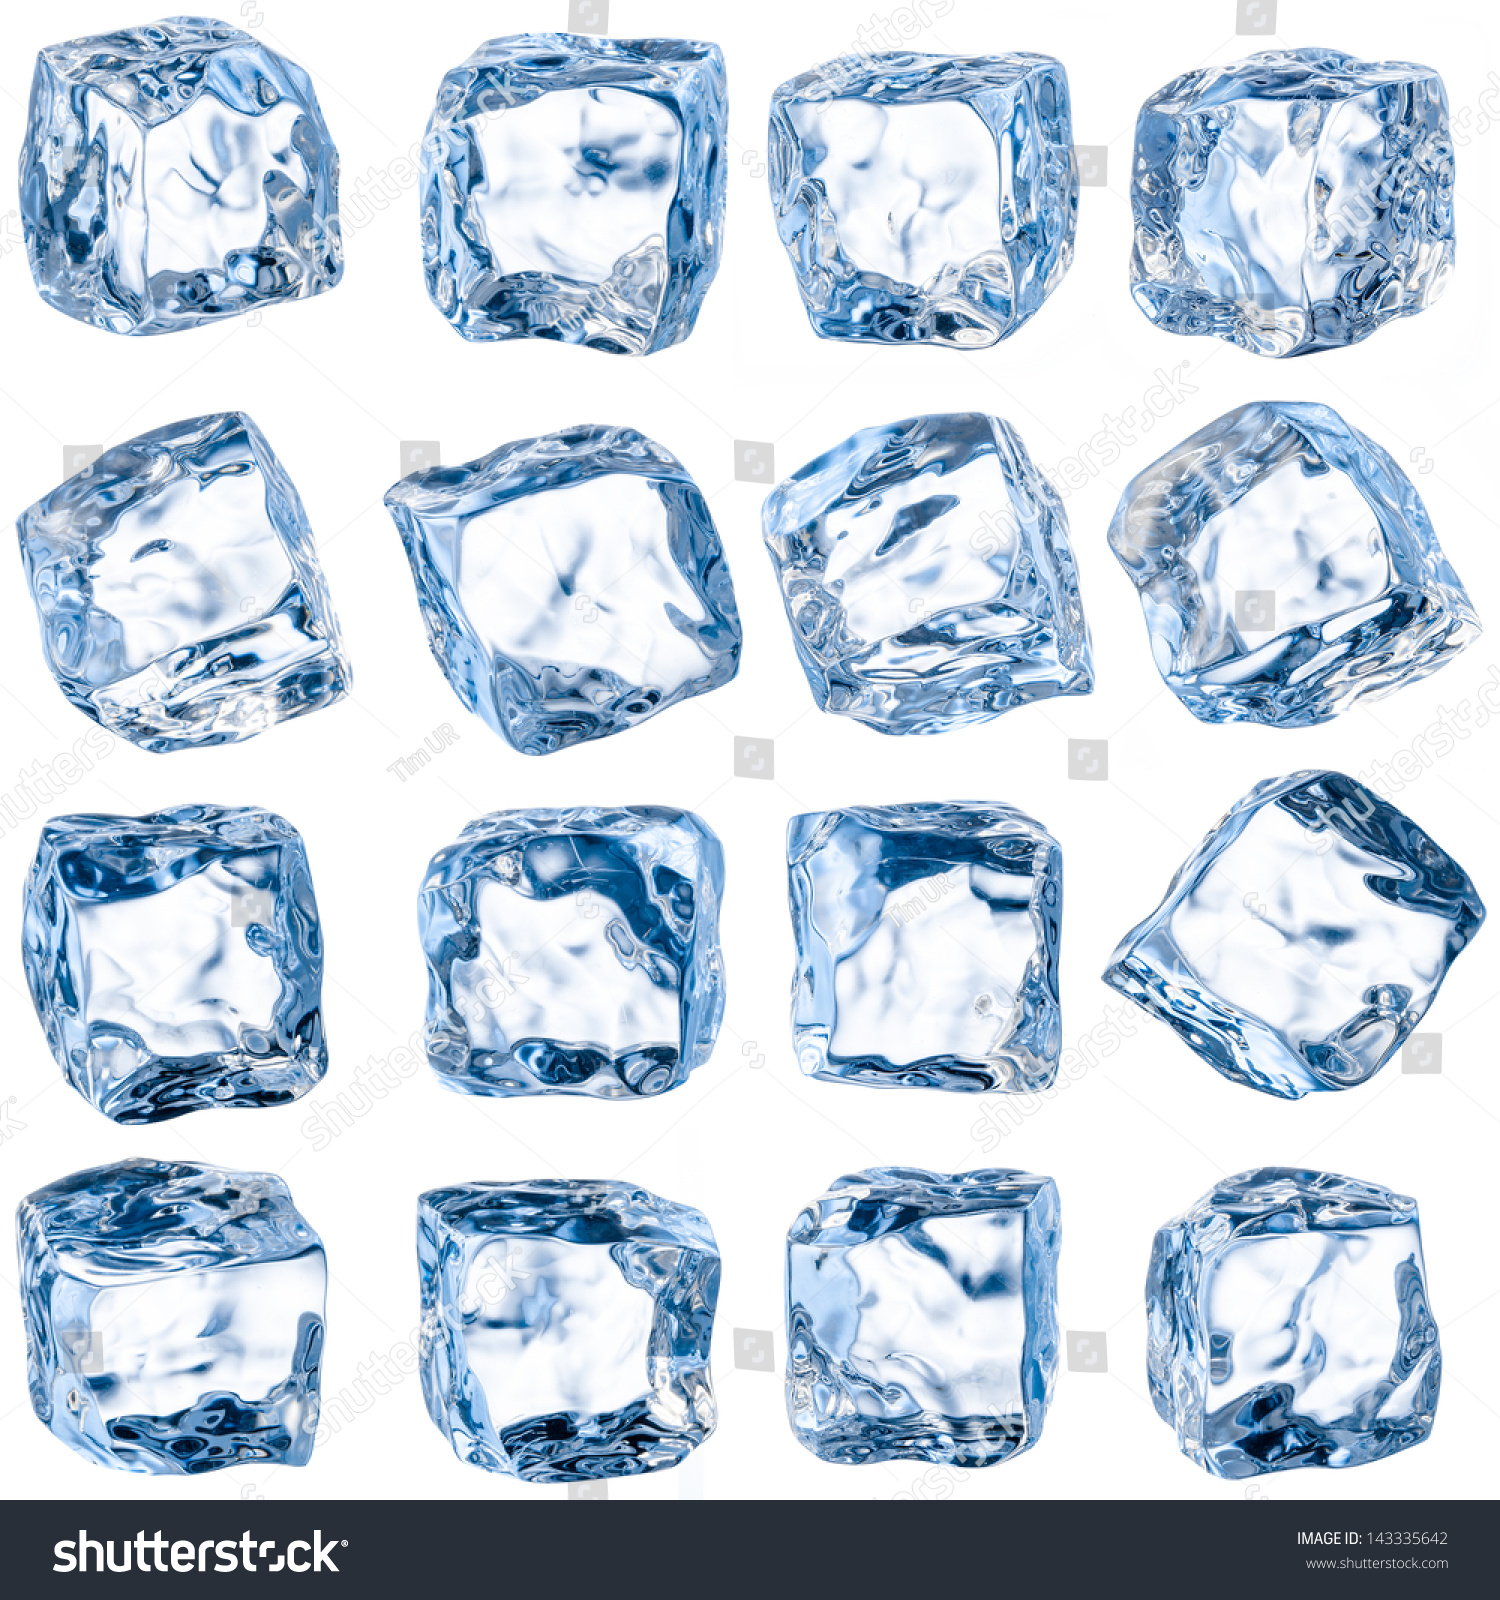 Cubes of ice on a white background. With clipping path #143335642